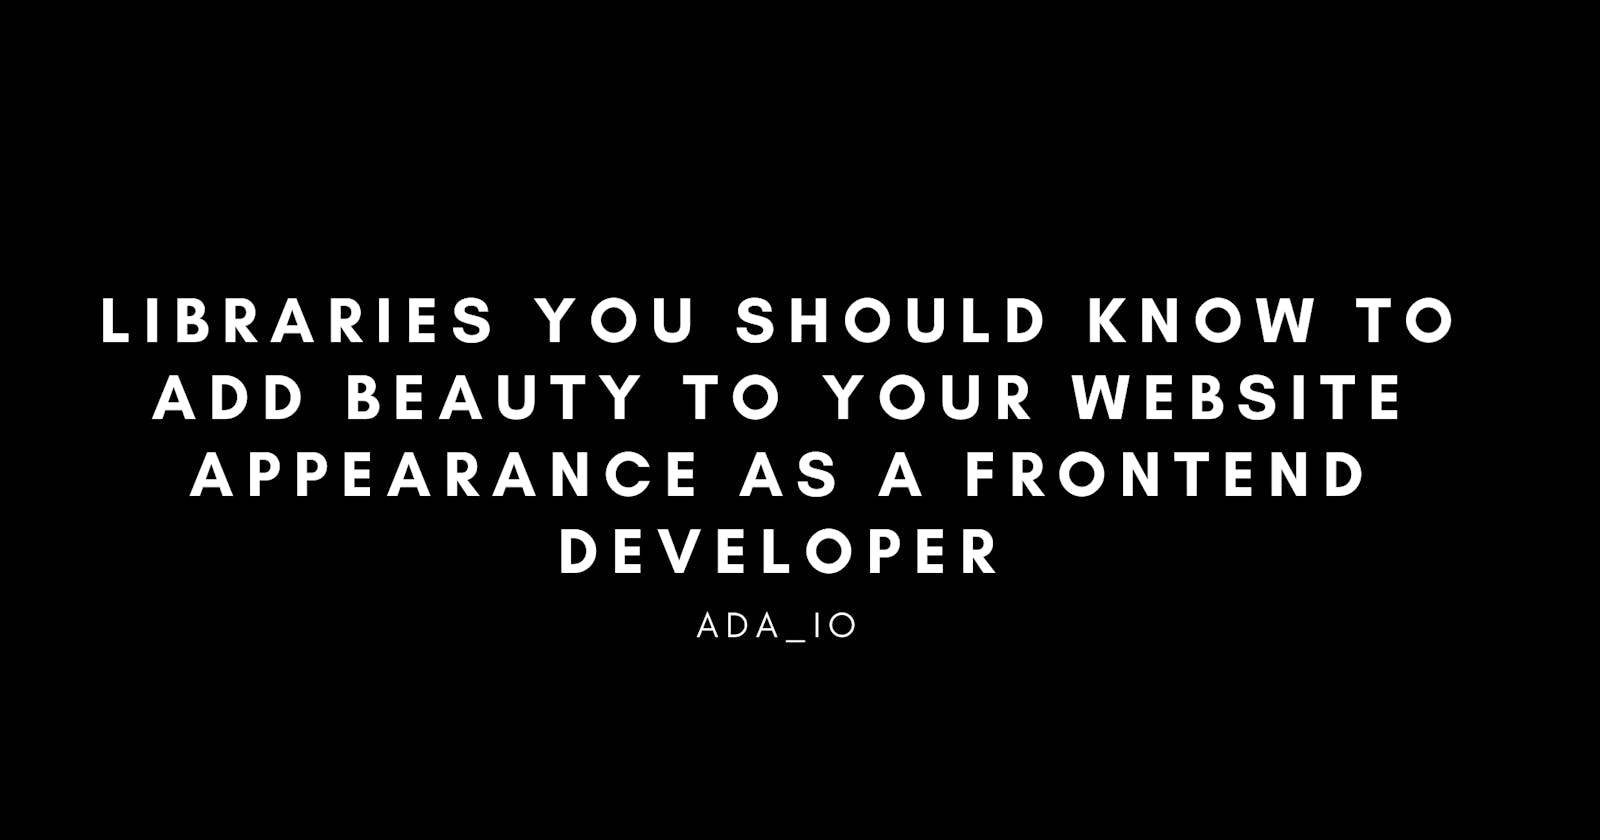 Libraries you should know to add beauty to your website appearance as a front-end developer